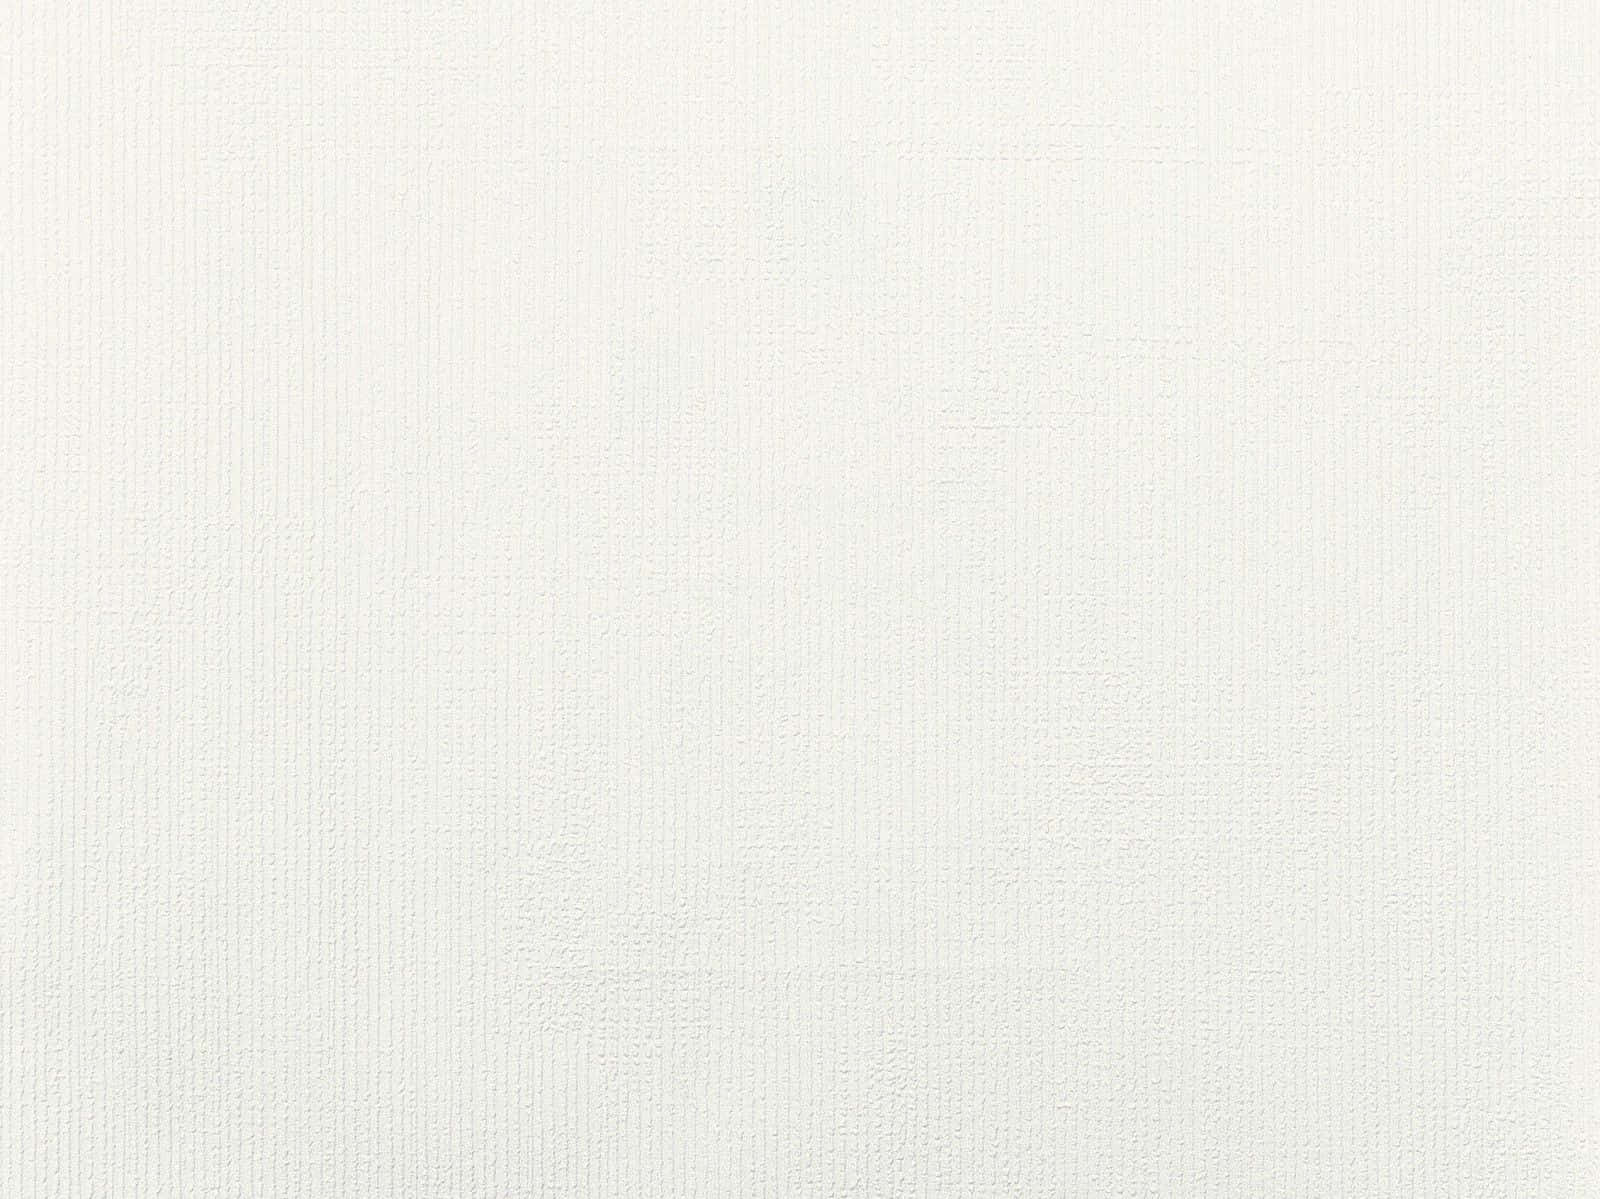 Zen Moment with a Pure White Background